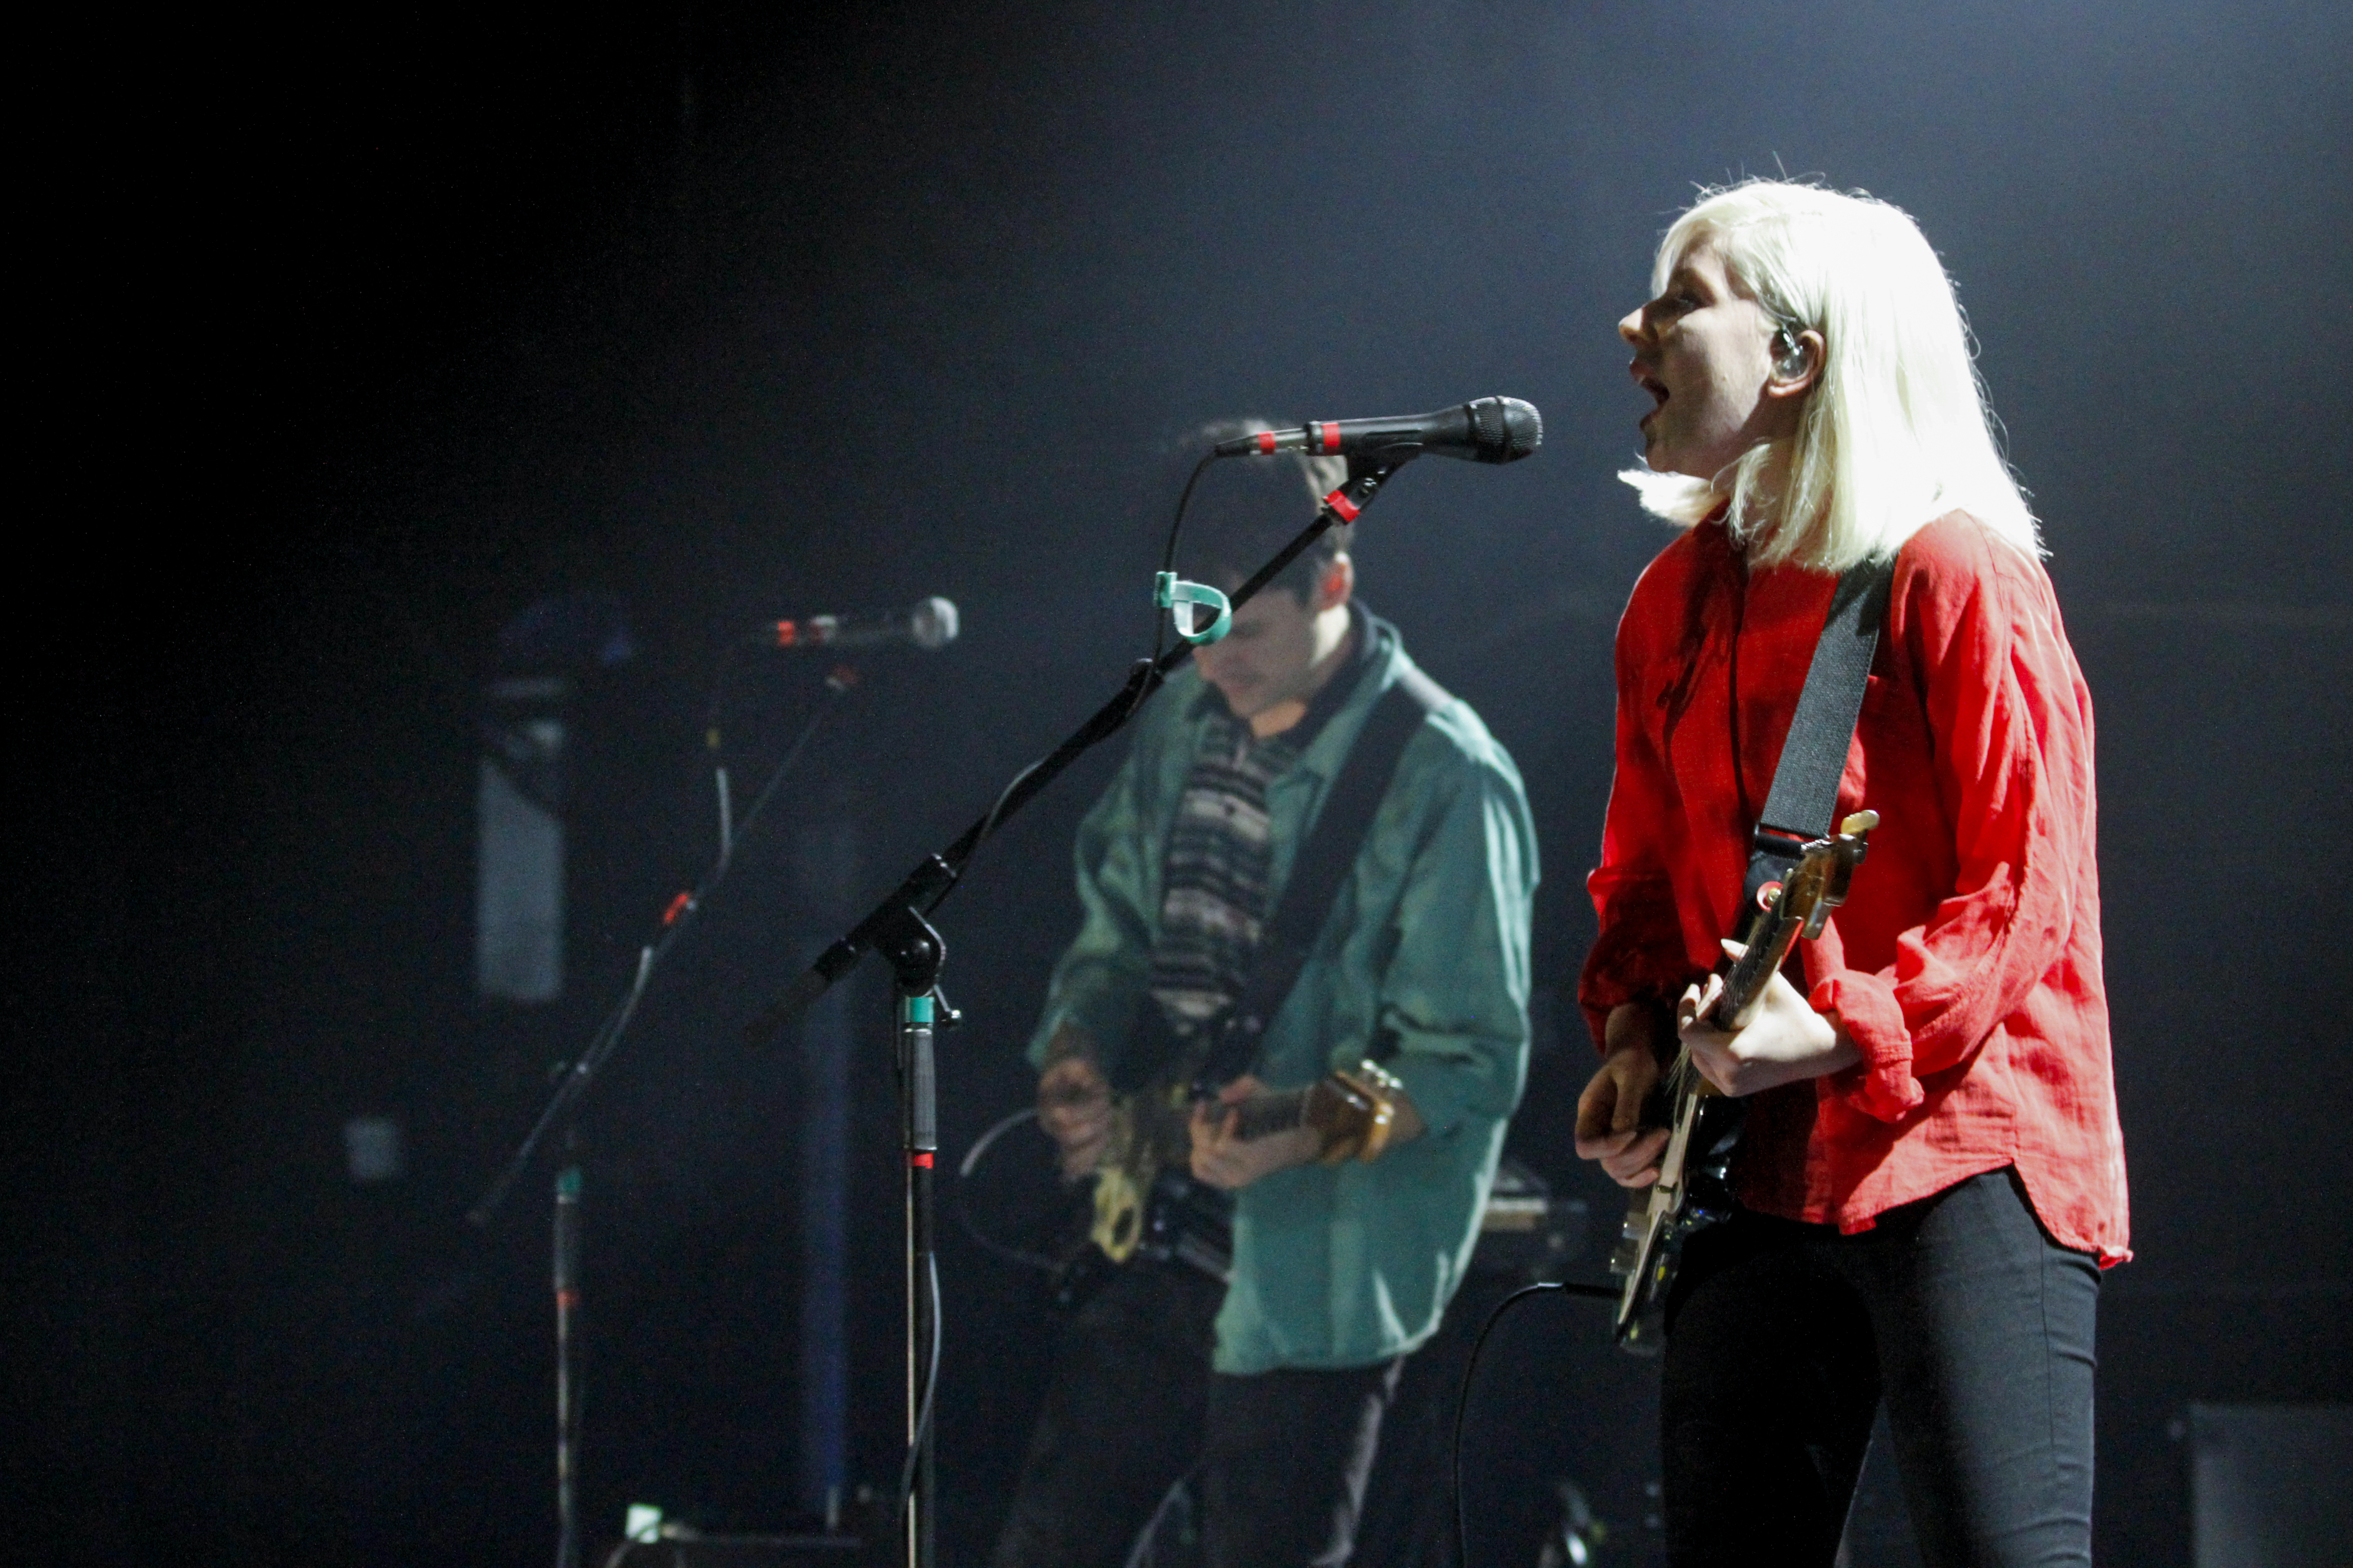 Alvvays plays at Brooklyn Steel in Williamsburg, Brooklyn, New York on Oct. 5, 2017. (© Michael Katzif - Do not use or republish without prior consent.)